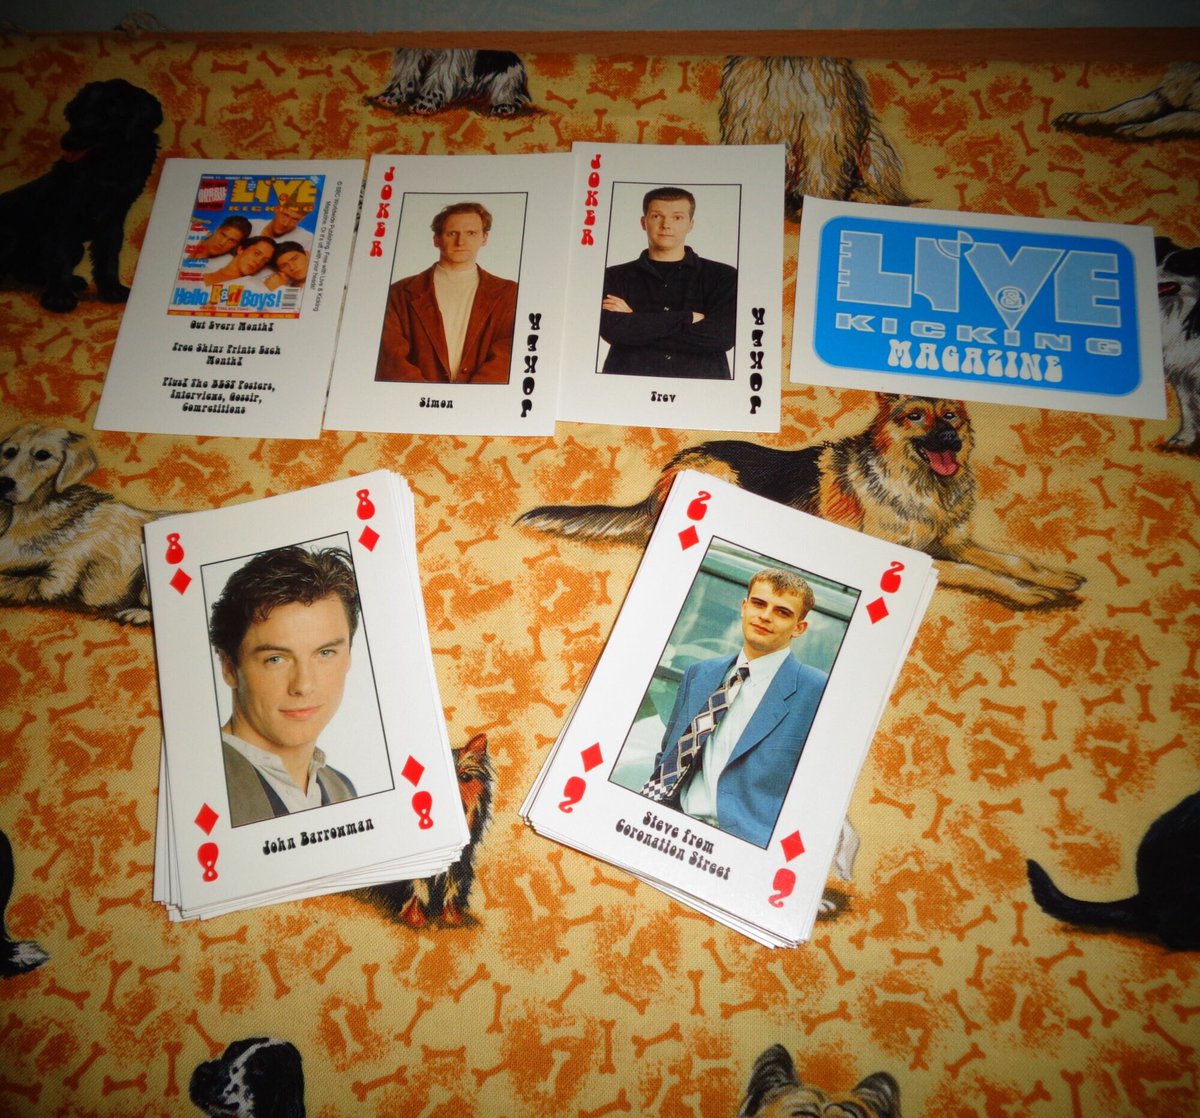 Excited to share the latest addition to my #etsy shop: Celebrity Playing Cards Memorabilia Live & Kicking Magazine Collectable Vintage Soapstars Popstars Film Stars Groups Plus More BBC etsy.me/46P5tjS #celebrity #playingcards #memorabilia #liveandkicking #maga